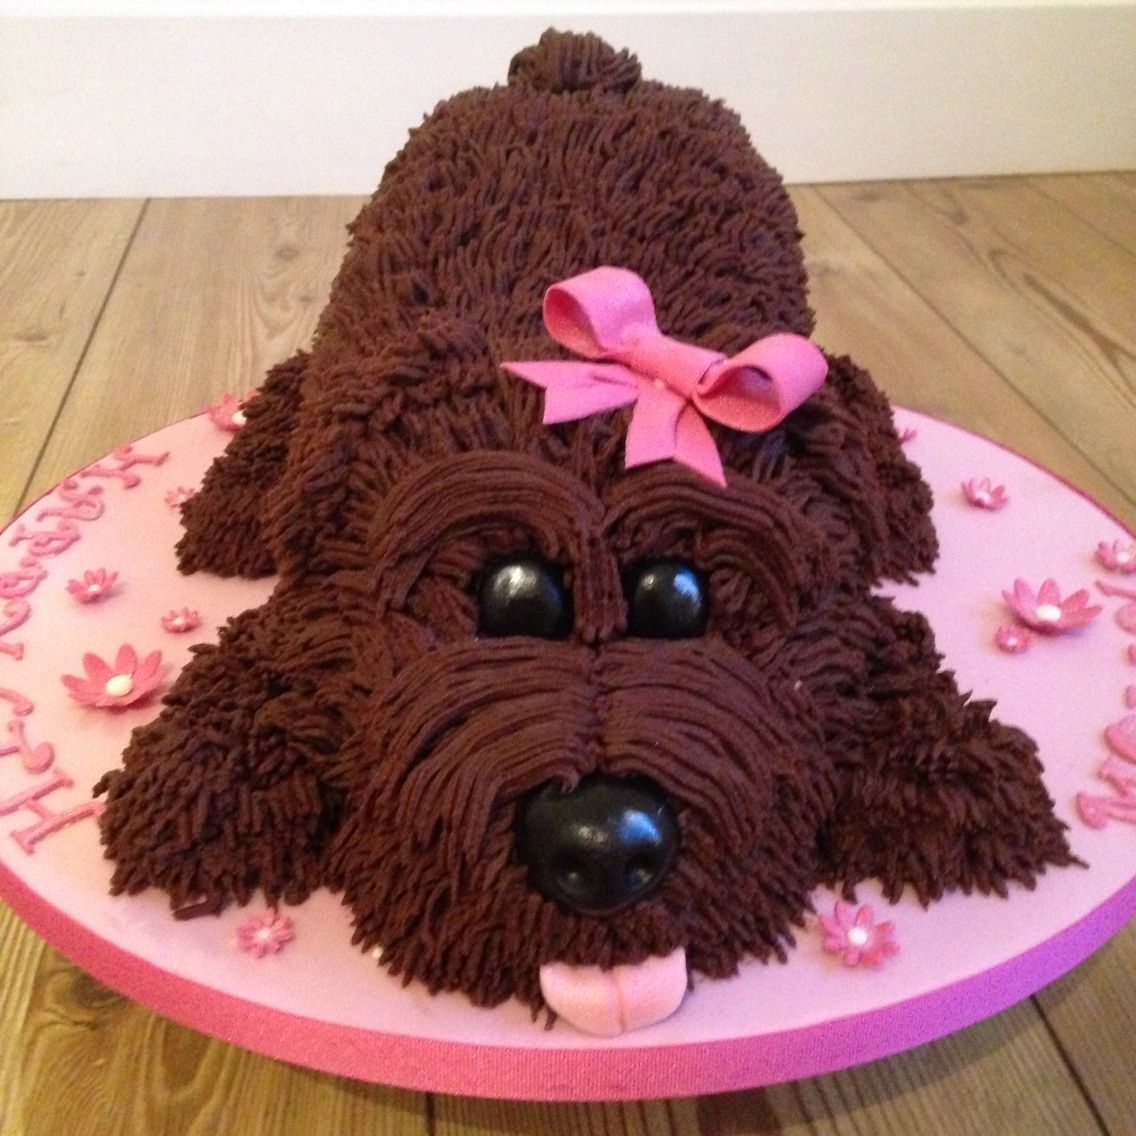 Dog Shaped Cake intended for Party